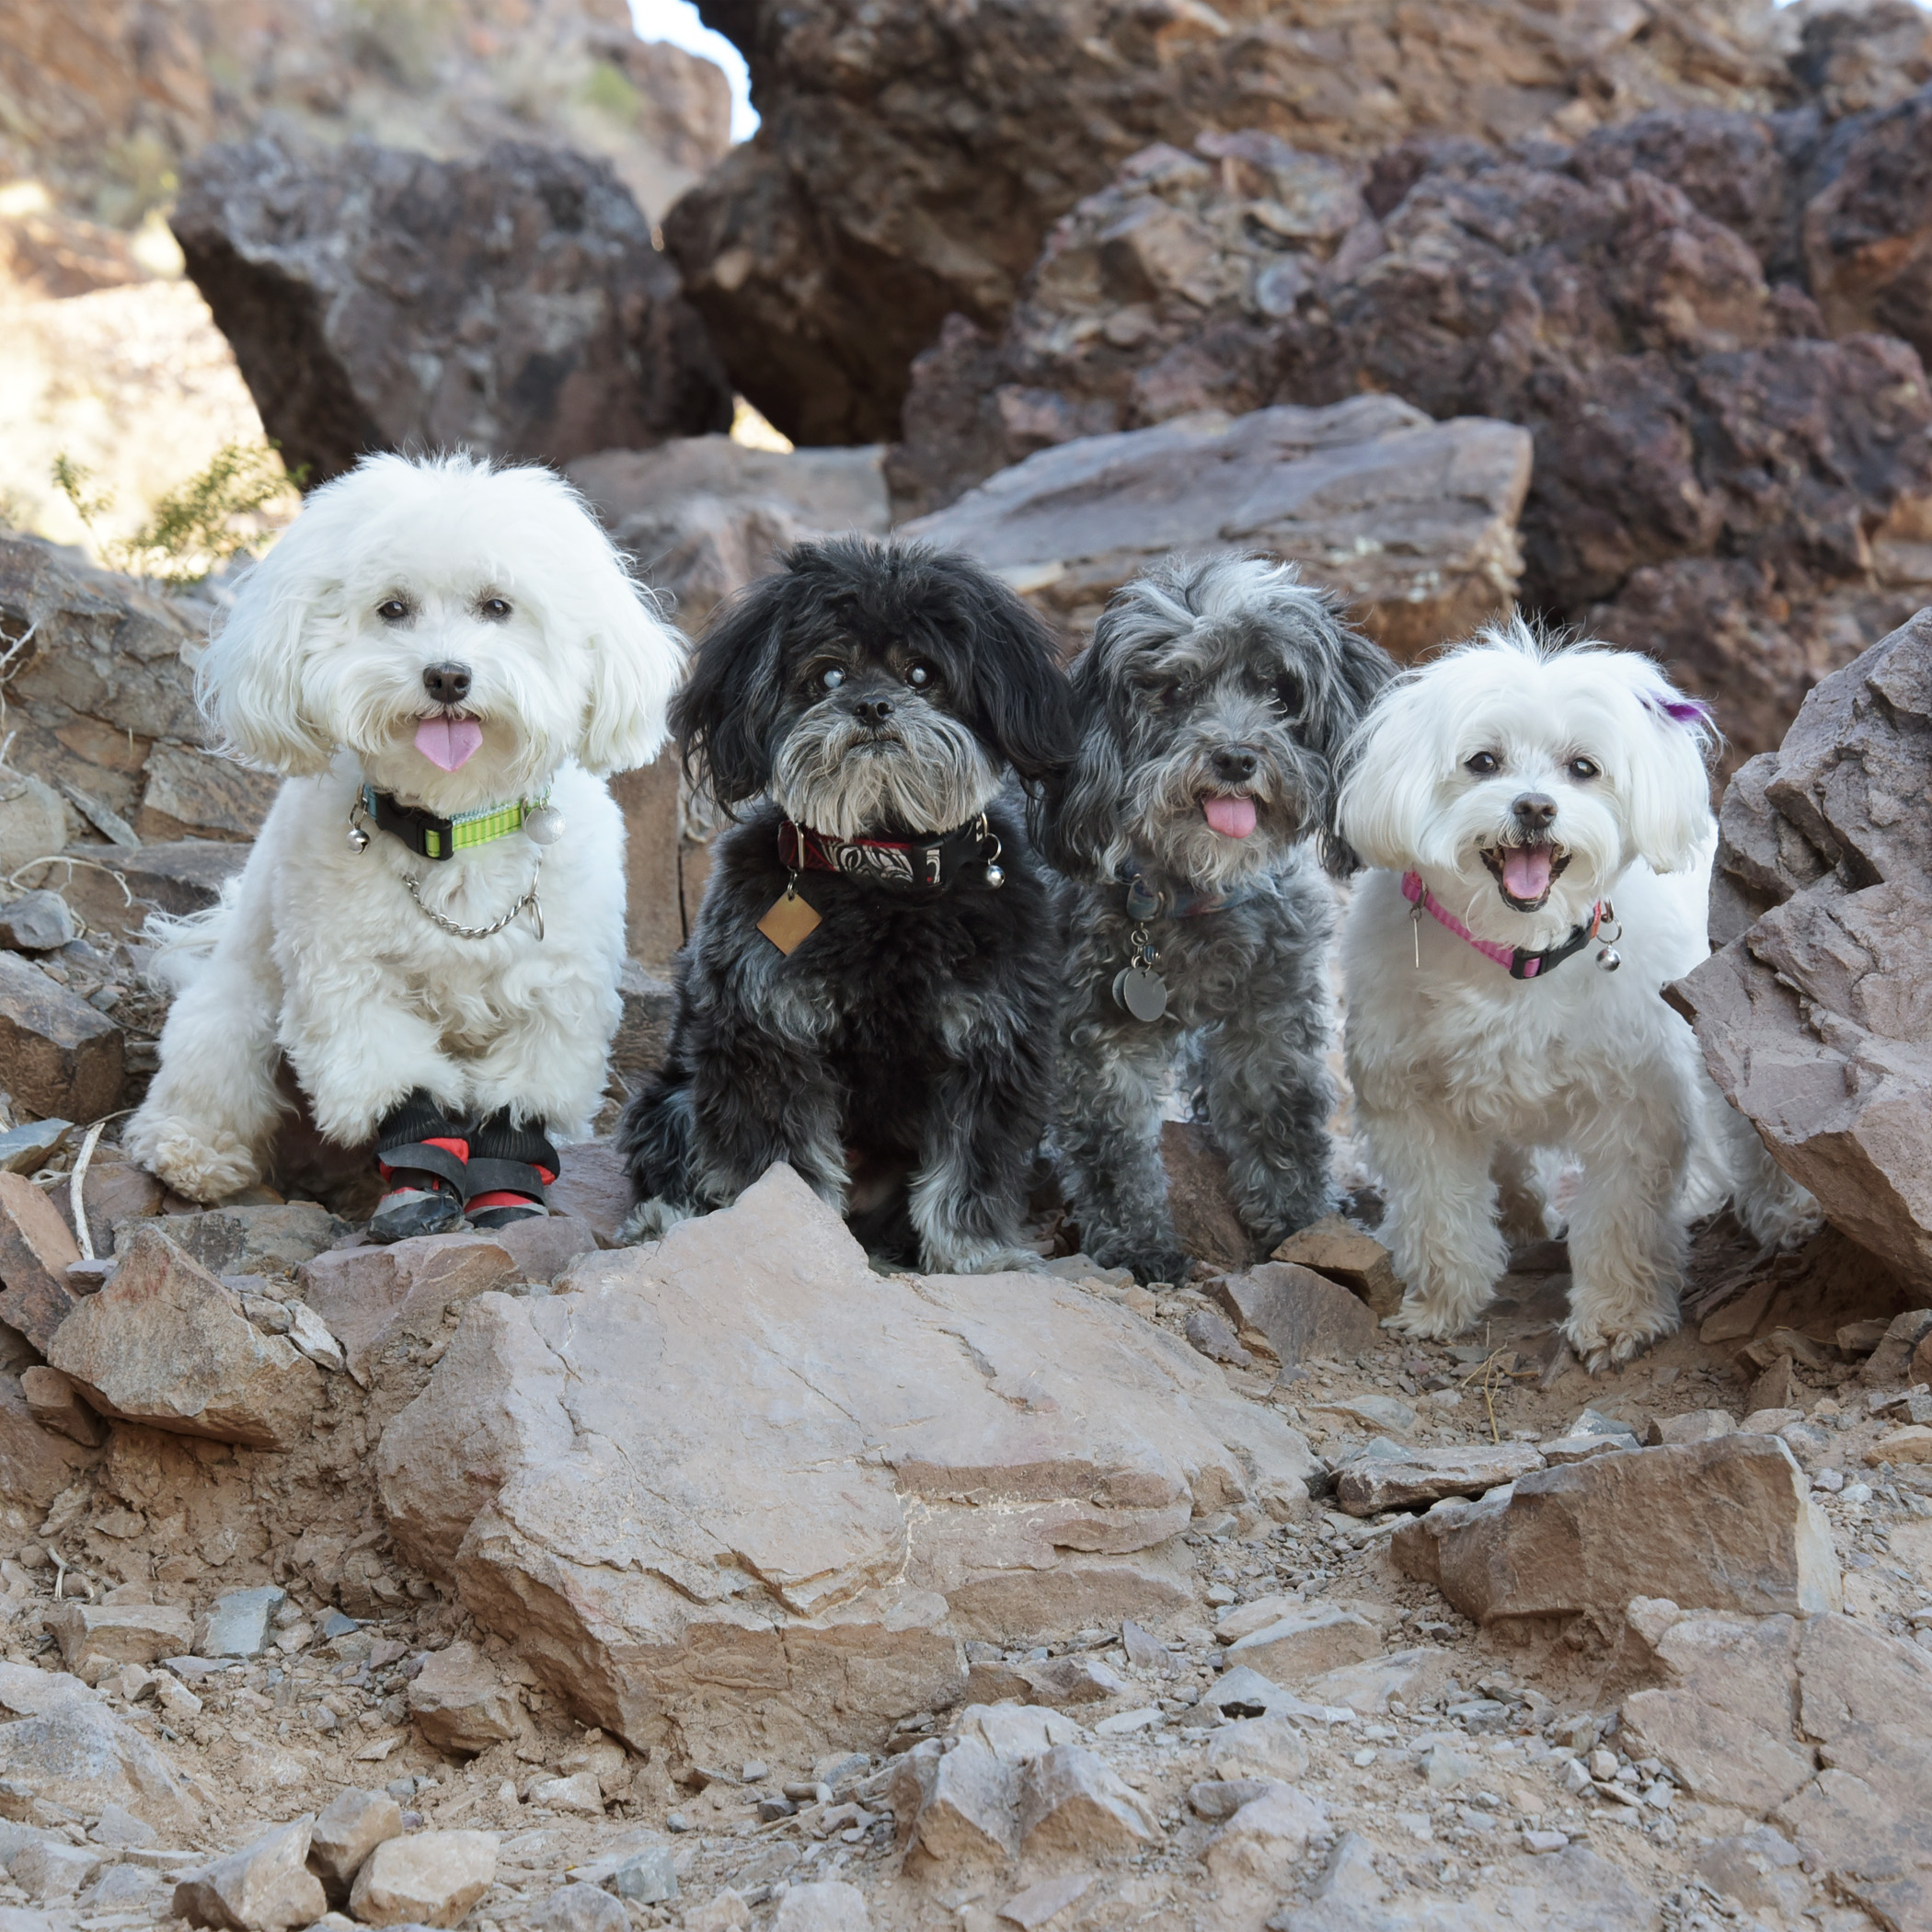  We went rock climbing today! Mommy &amp; Daddy had to help us in a few places where the rocks were too big for our little legs. But, for the most part, we scrambled up the rocks like we were professionals! 